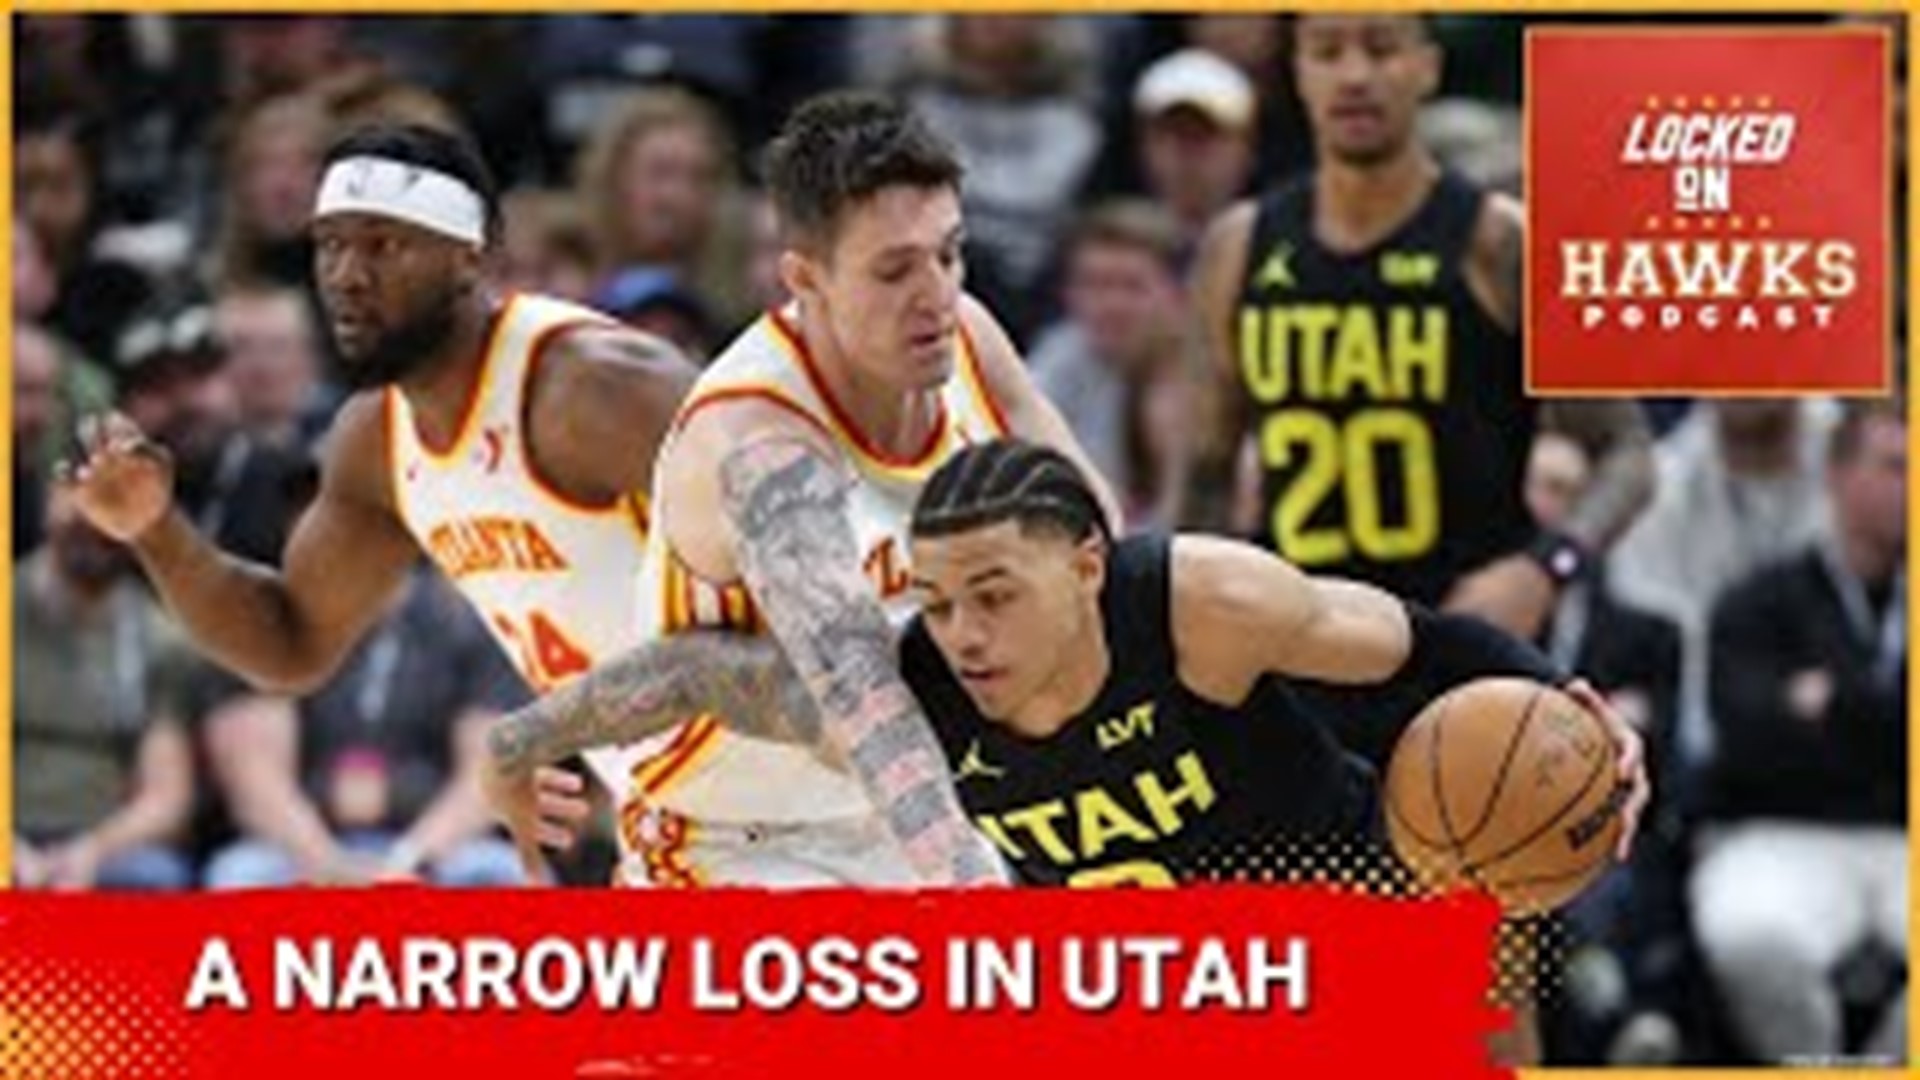 Brad Rowland hosts episode No. 1675 of the Locked on Hawks podcast. The show breaks down Friday's game between the Atlanta Hawks and the Utah Jazz.